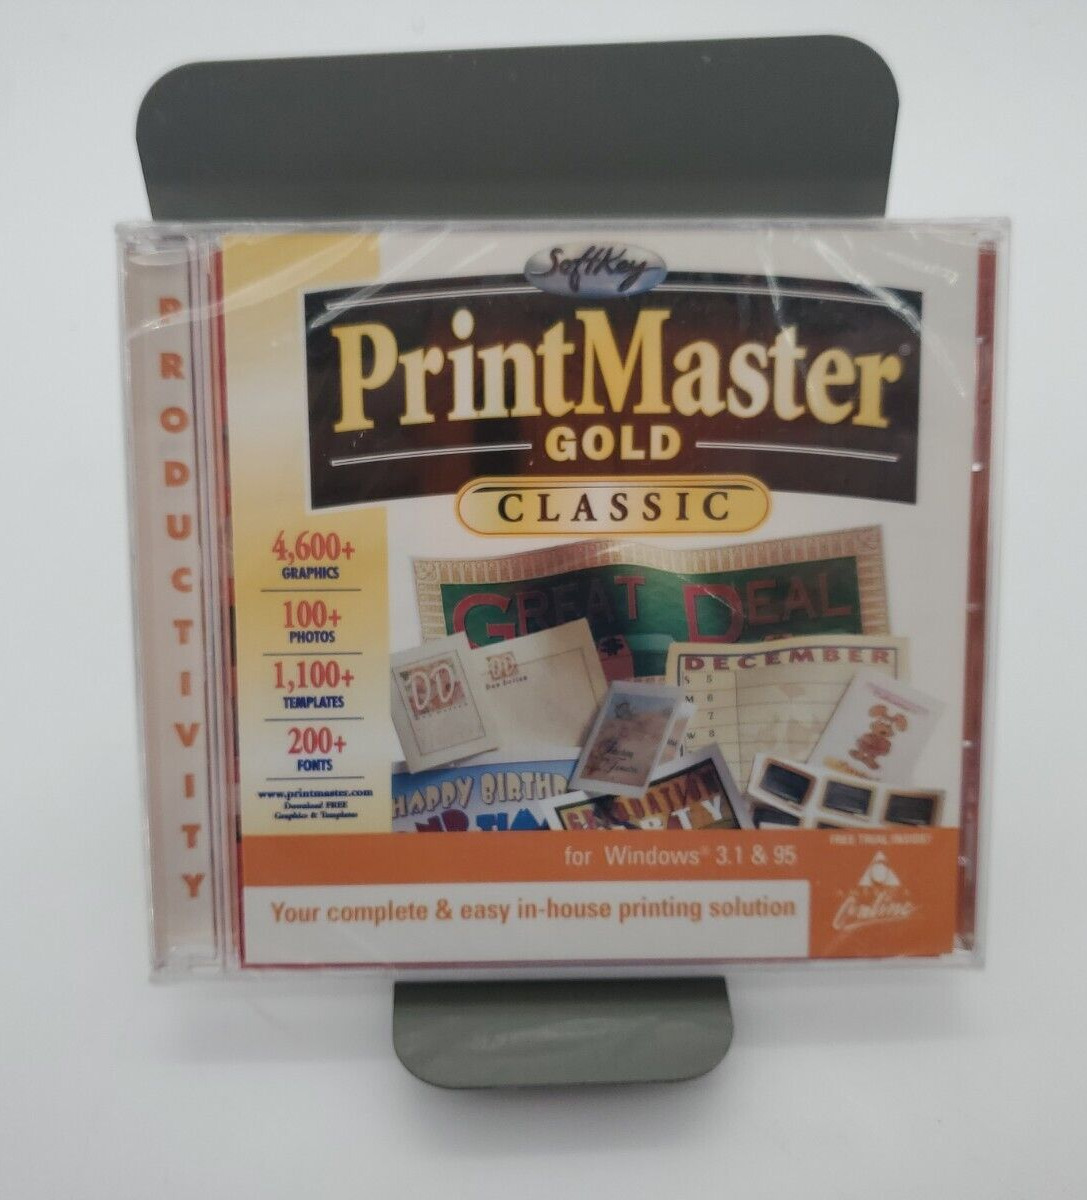 NEW PRINT MASTER GOLD CLASSIC - JEWEL CASE - FOR WINDOWS 3.1 or Windows 95